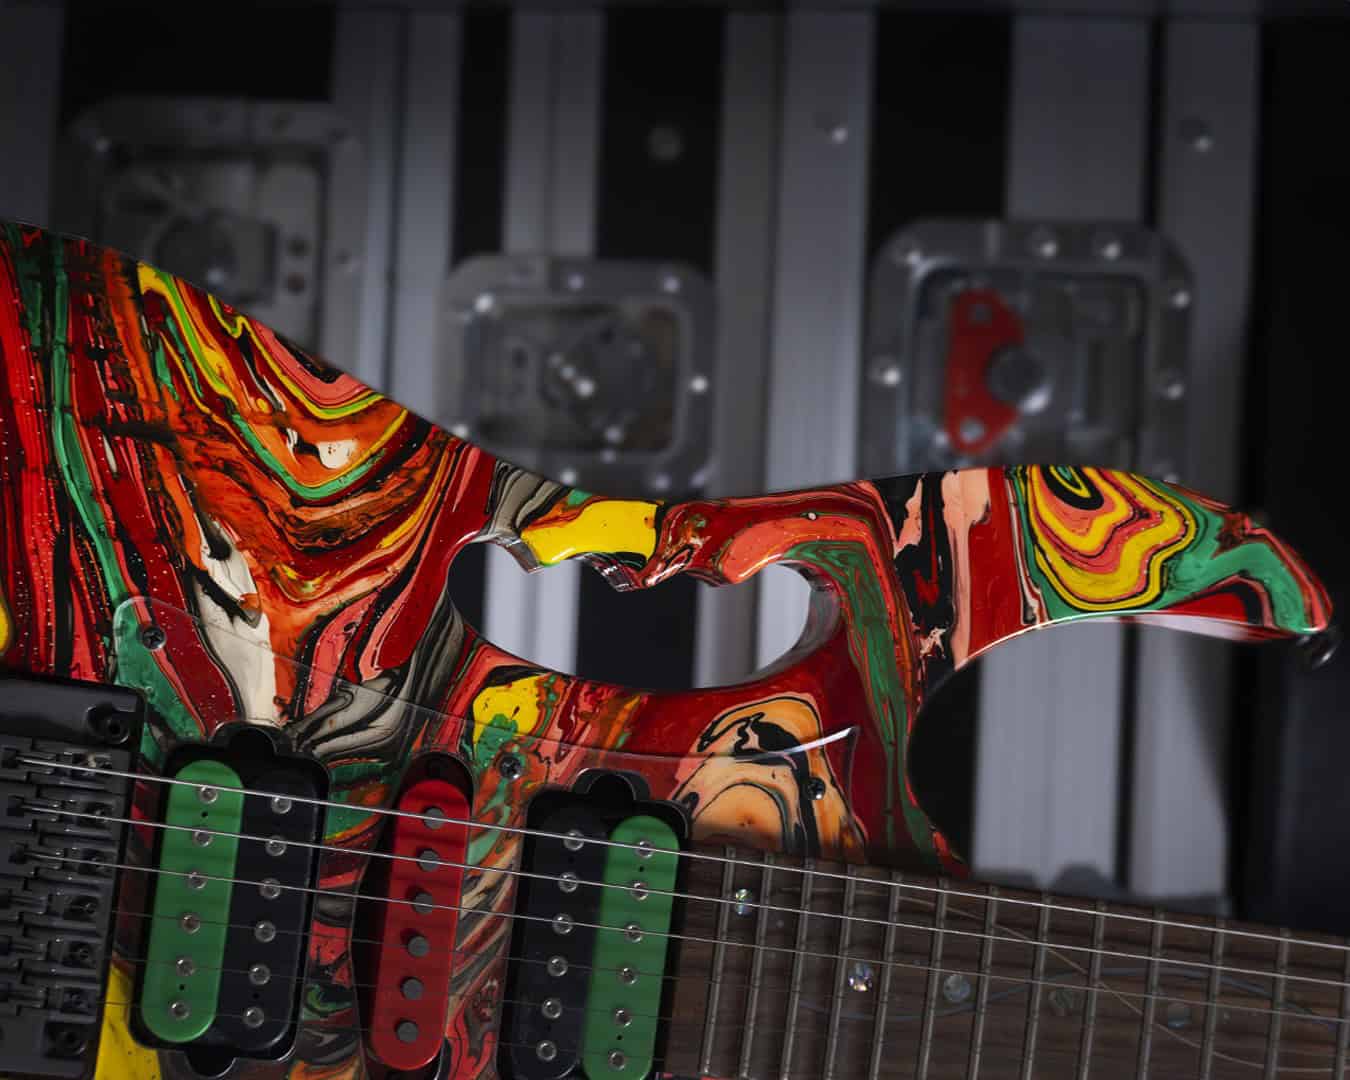 Barcelona opens Europe's first museum of rock star guitars